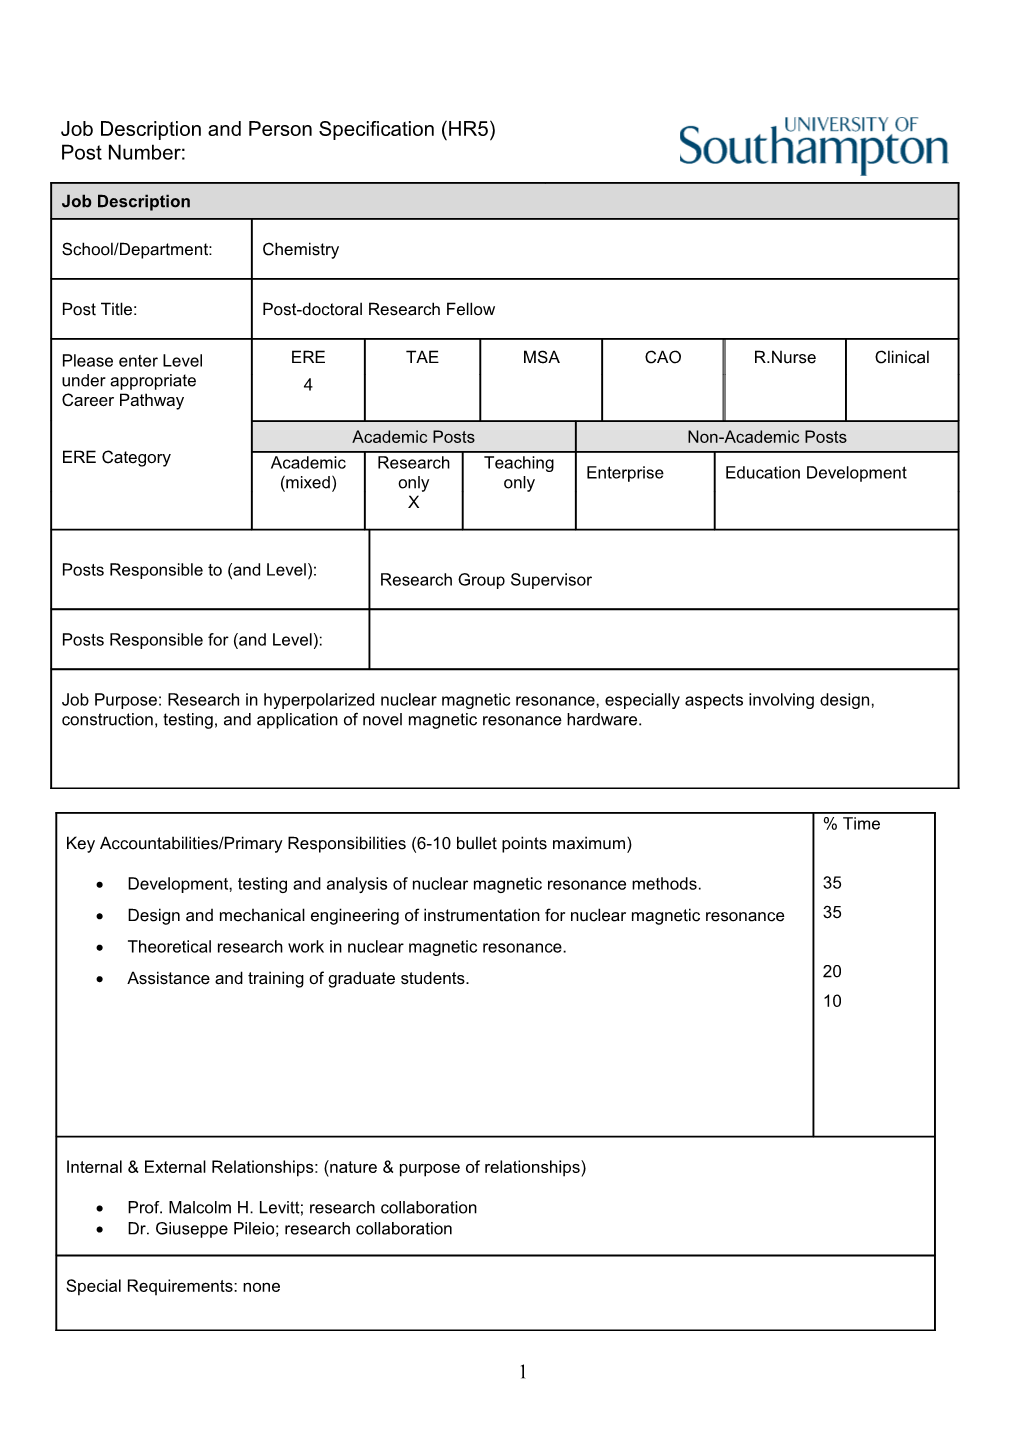 Job Hazard Analysis Form - Appendix to Job and Person Specification s2